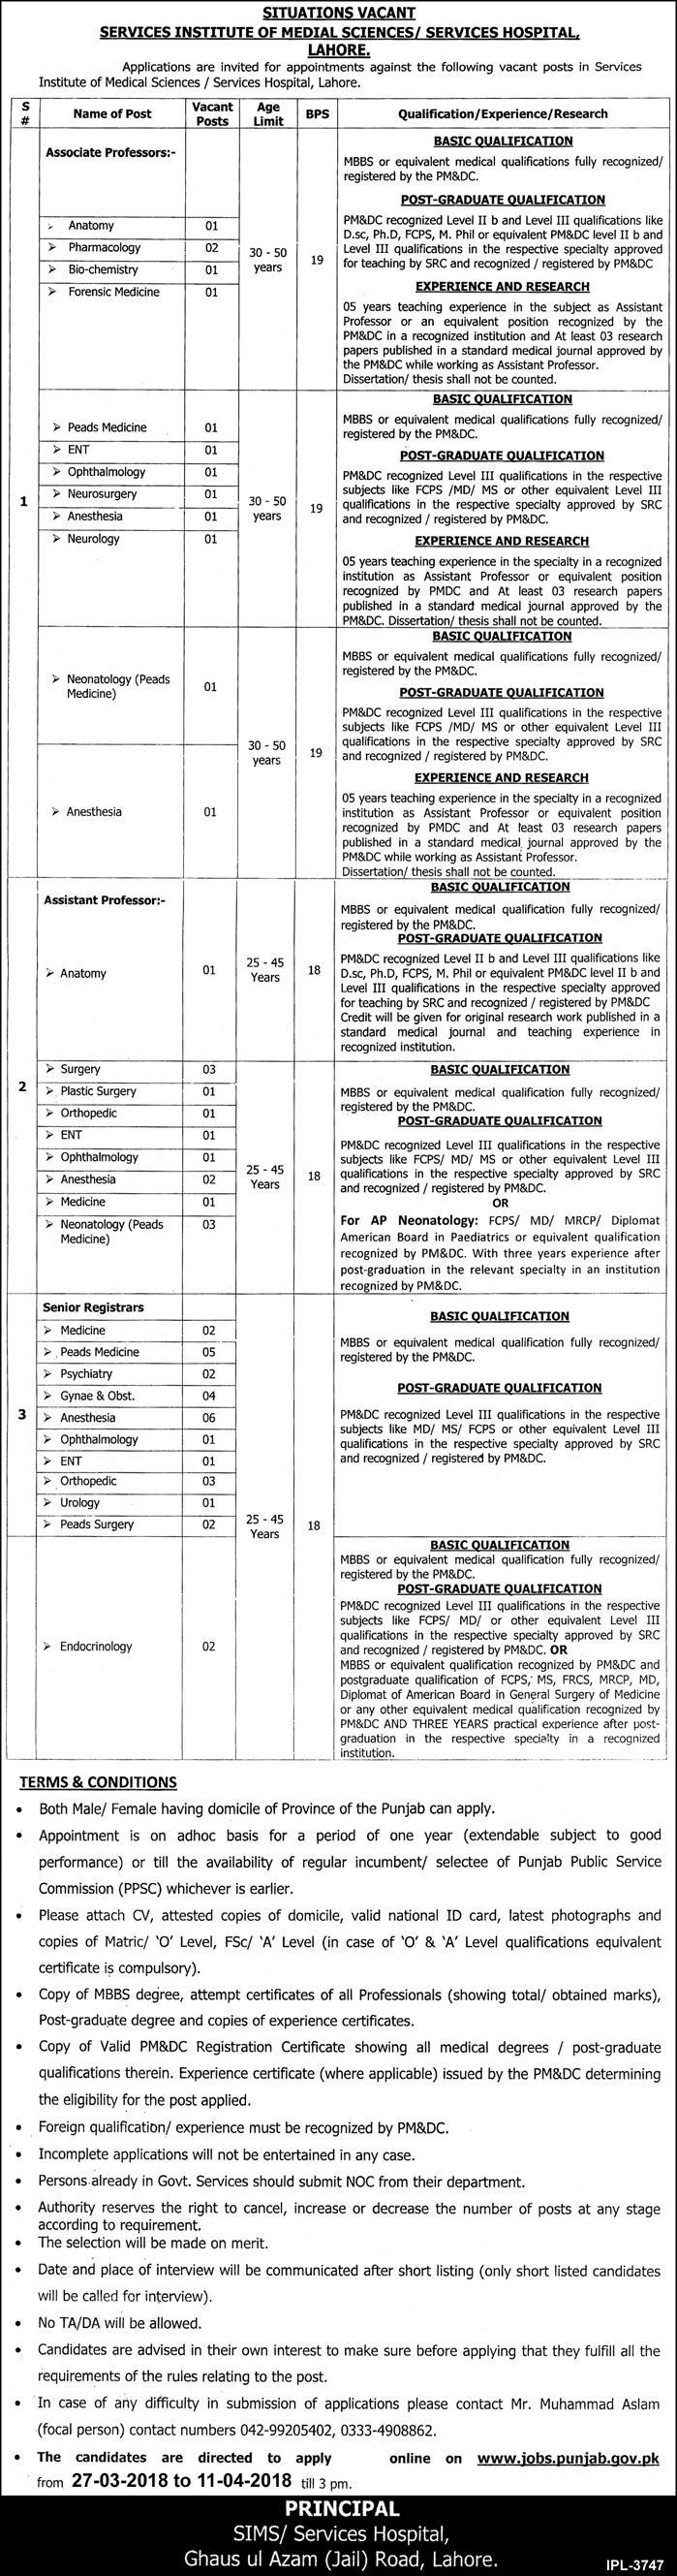 Jobs In Services Institute Of Medical Sciences 28 Mar 2018